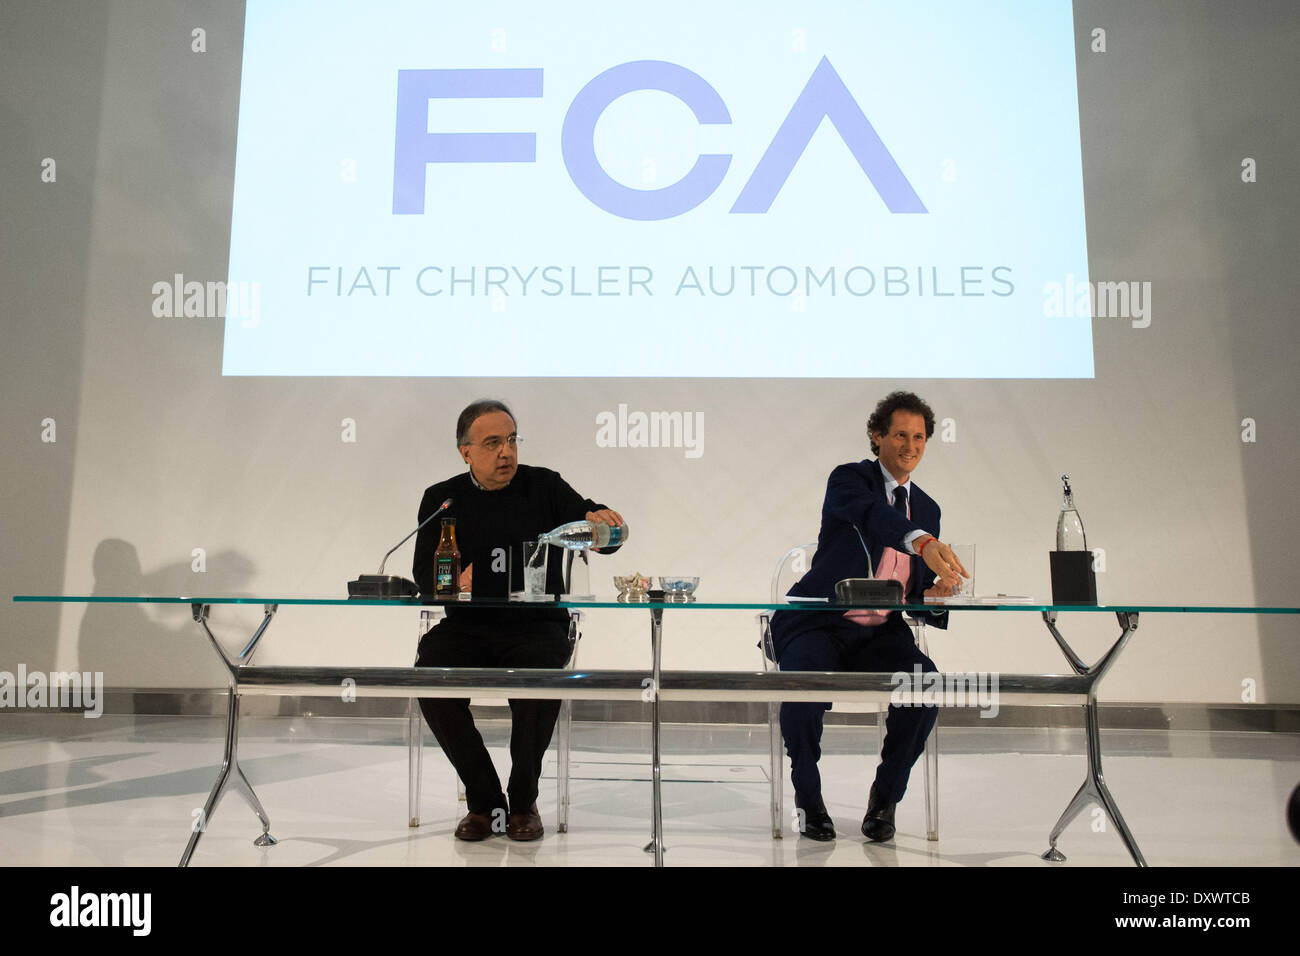 Turin, Italy. 31st Mar, 2014. Sergio Marchionne (L)and John Elkan (R)speak at general Meeting of Fiat Shareholders, in Turin, Italy, on March 31, 2014. This is one of the last meetings before the merge of Fiat and Chrysler in the new company Fiat Chrysler Automobiles. © Mauro Ujetto/NurPhoto/ZUMAPRESS.com/Alamy Live News Stock Photo